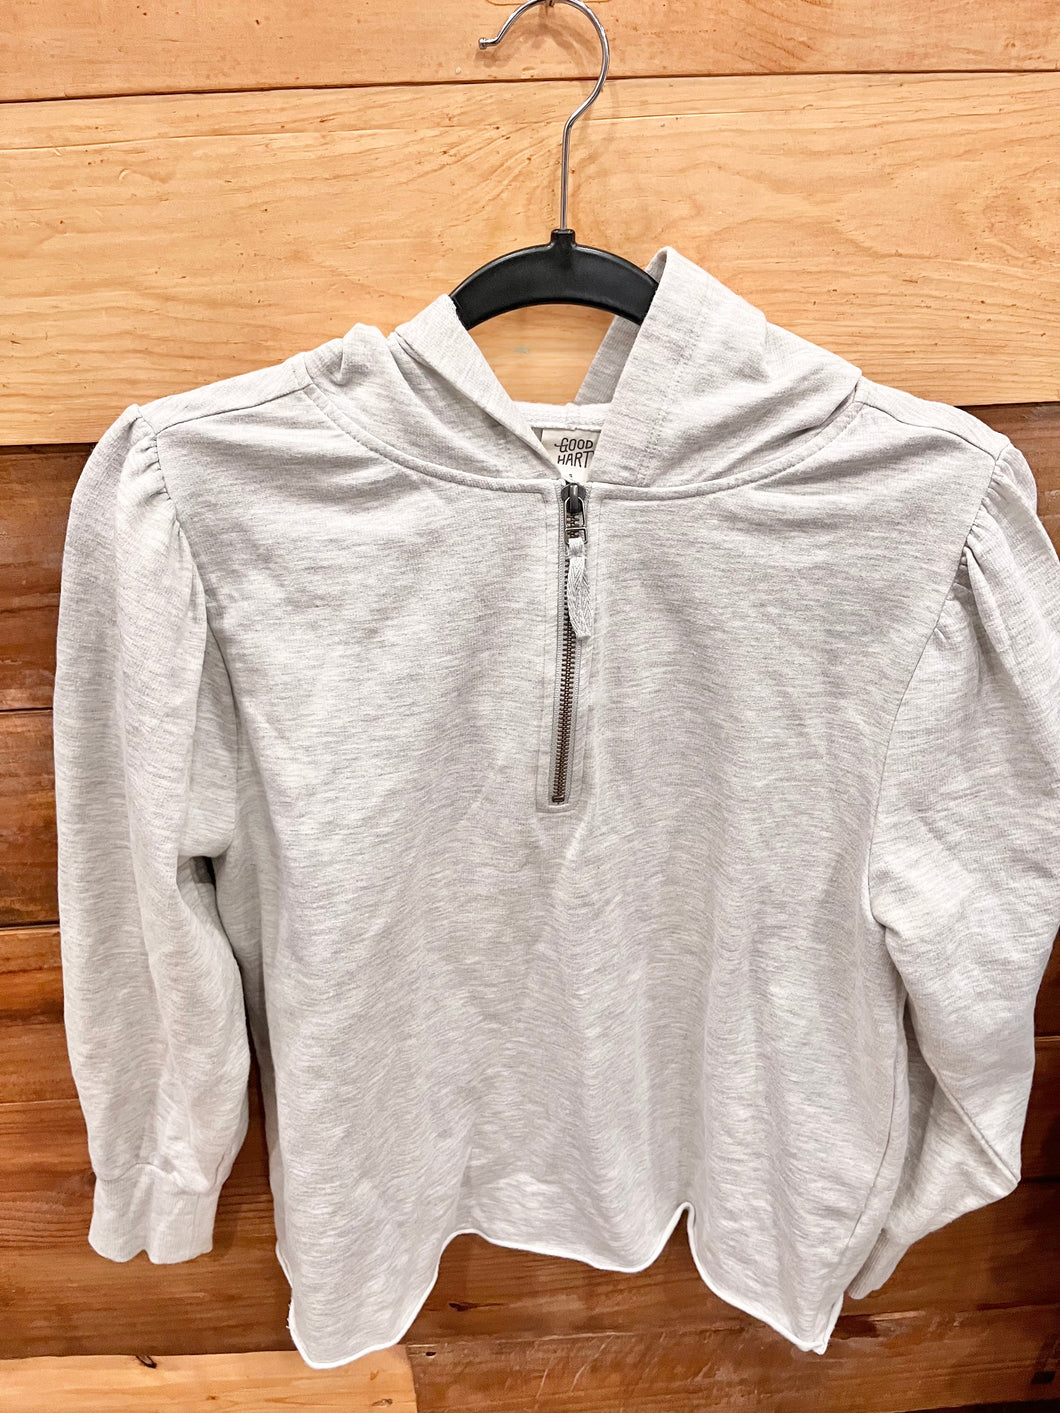 Good Hart Gray Pullover Size Small